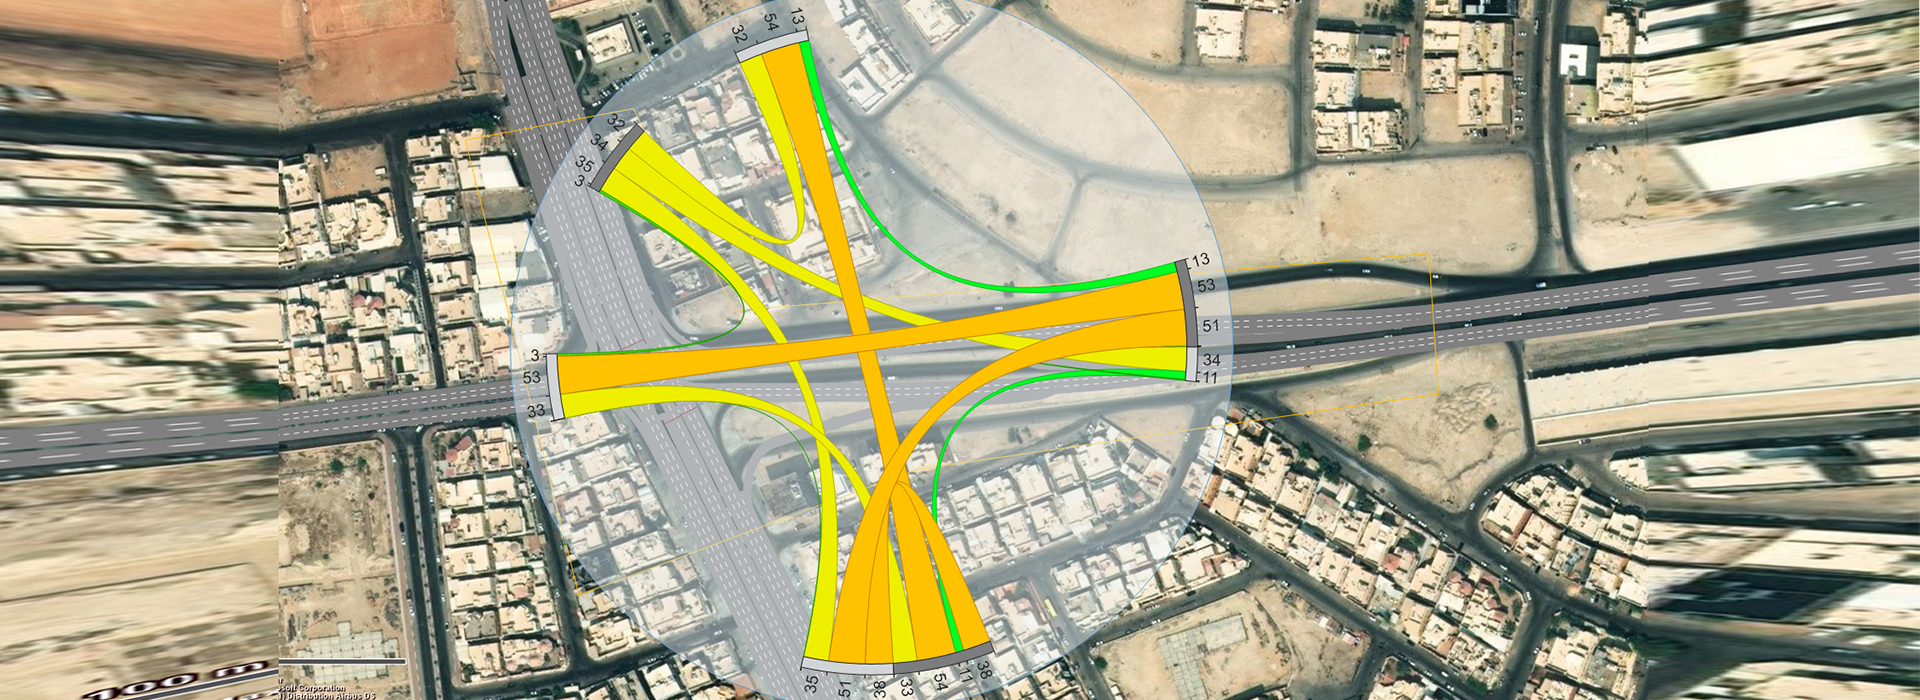 DESIGN AND OPERATIONAL PLAN FOR AL-UQAIR TOURIST ROAD IN AL AHSA - 6